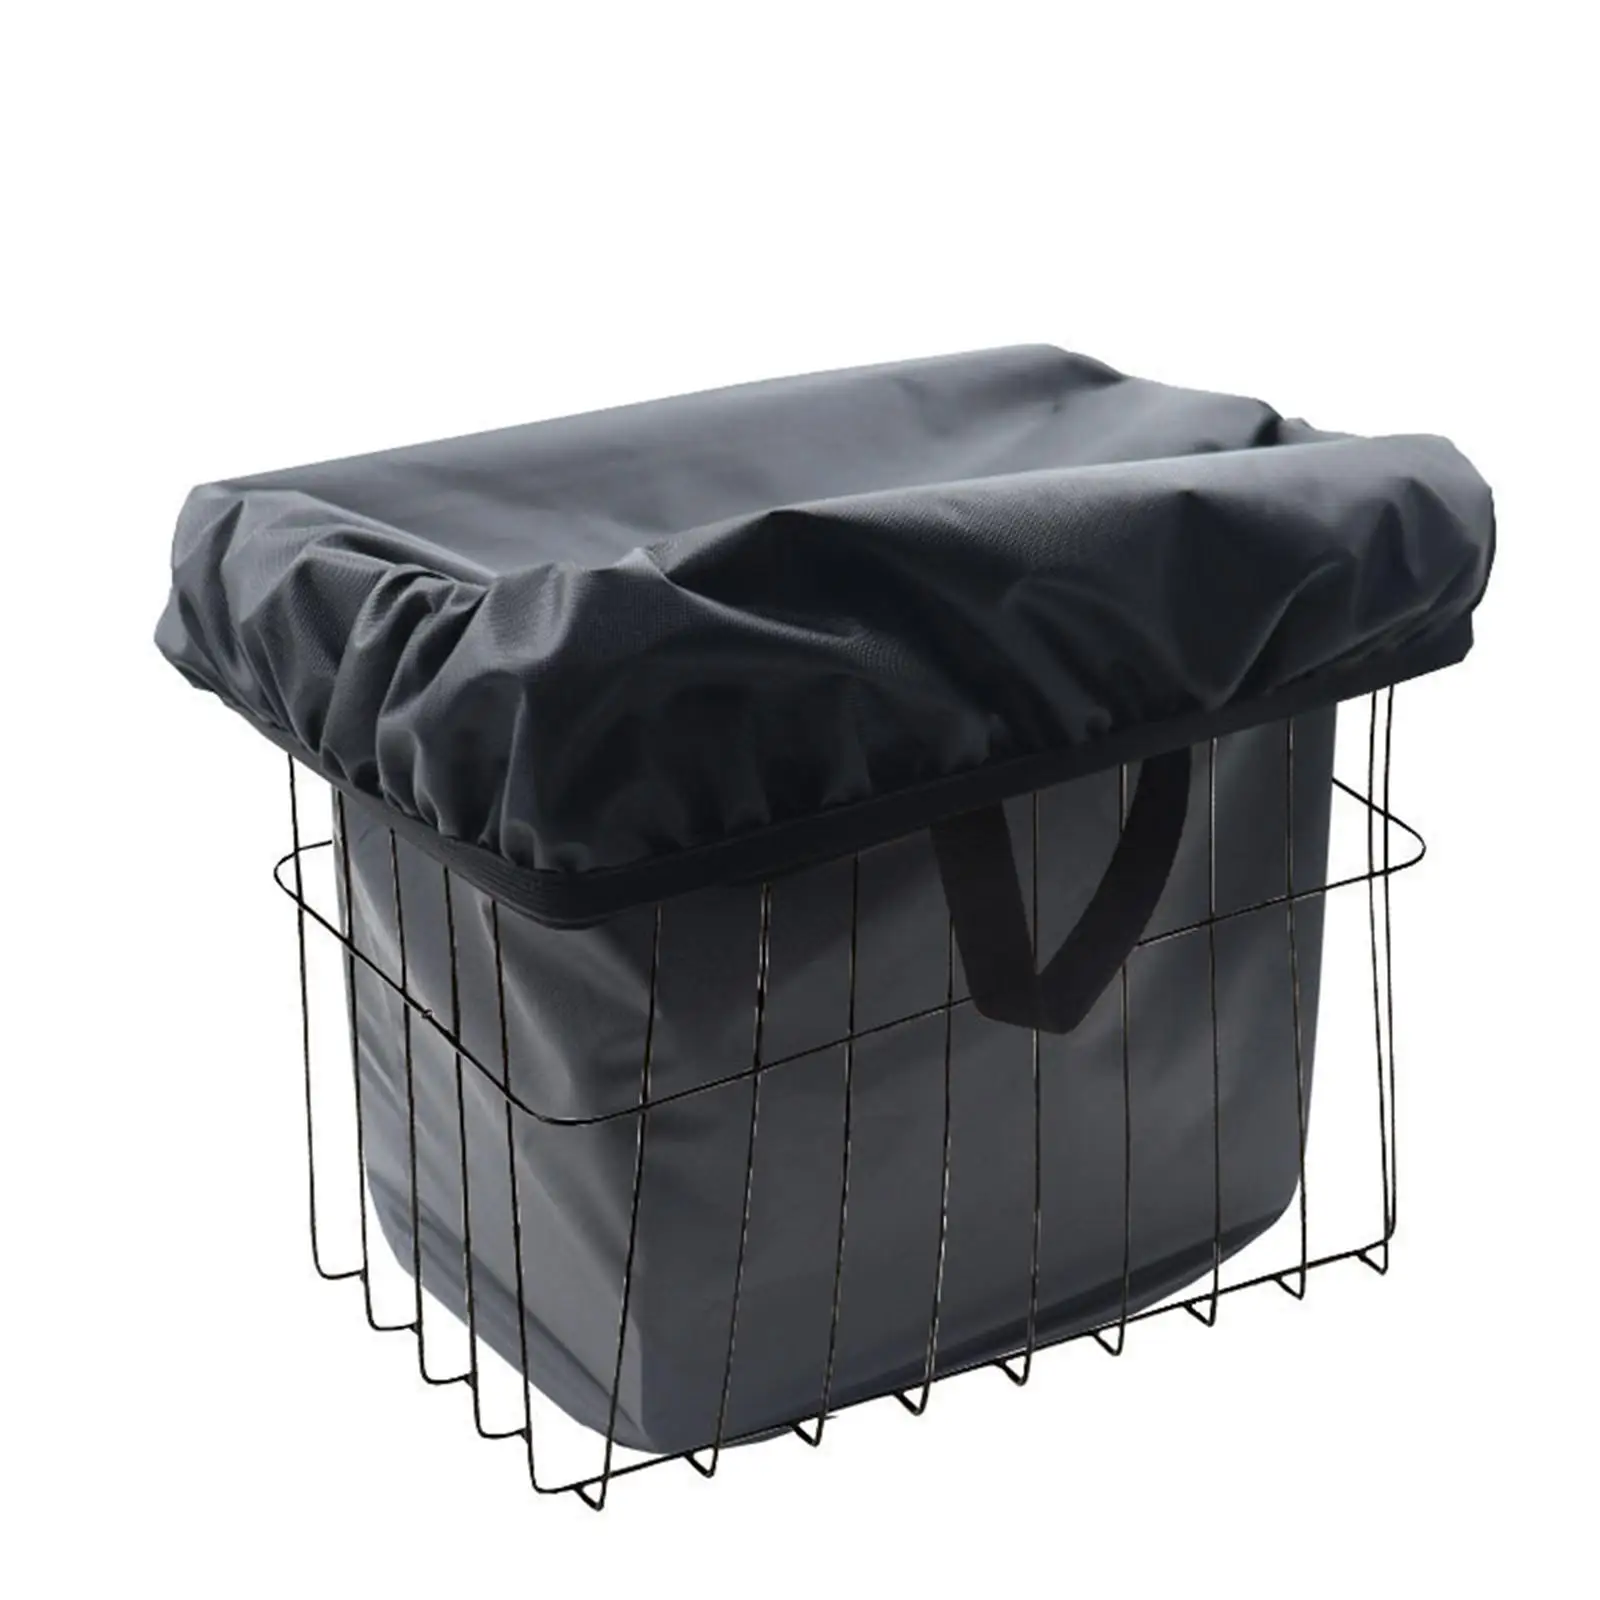 Bike Basket Lining Rain Protection Cover Multipurpose Rainproof Washable Easy Install Portable for Electric Vehicle Baskets